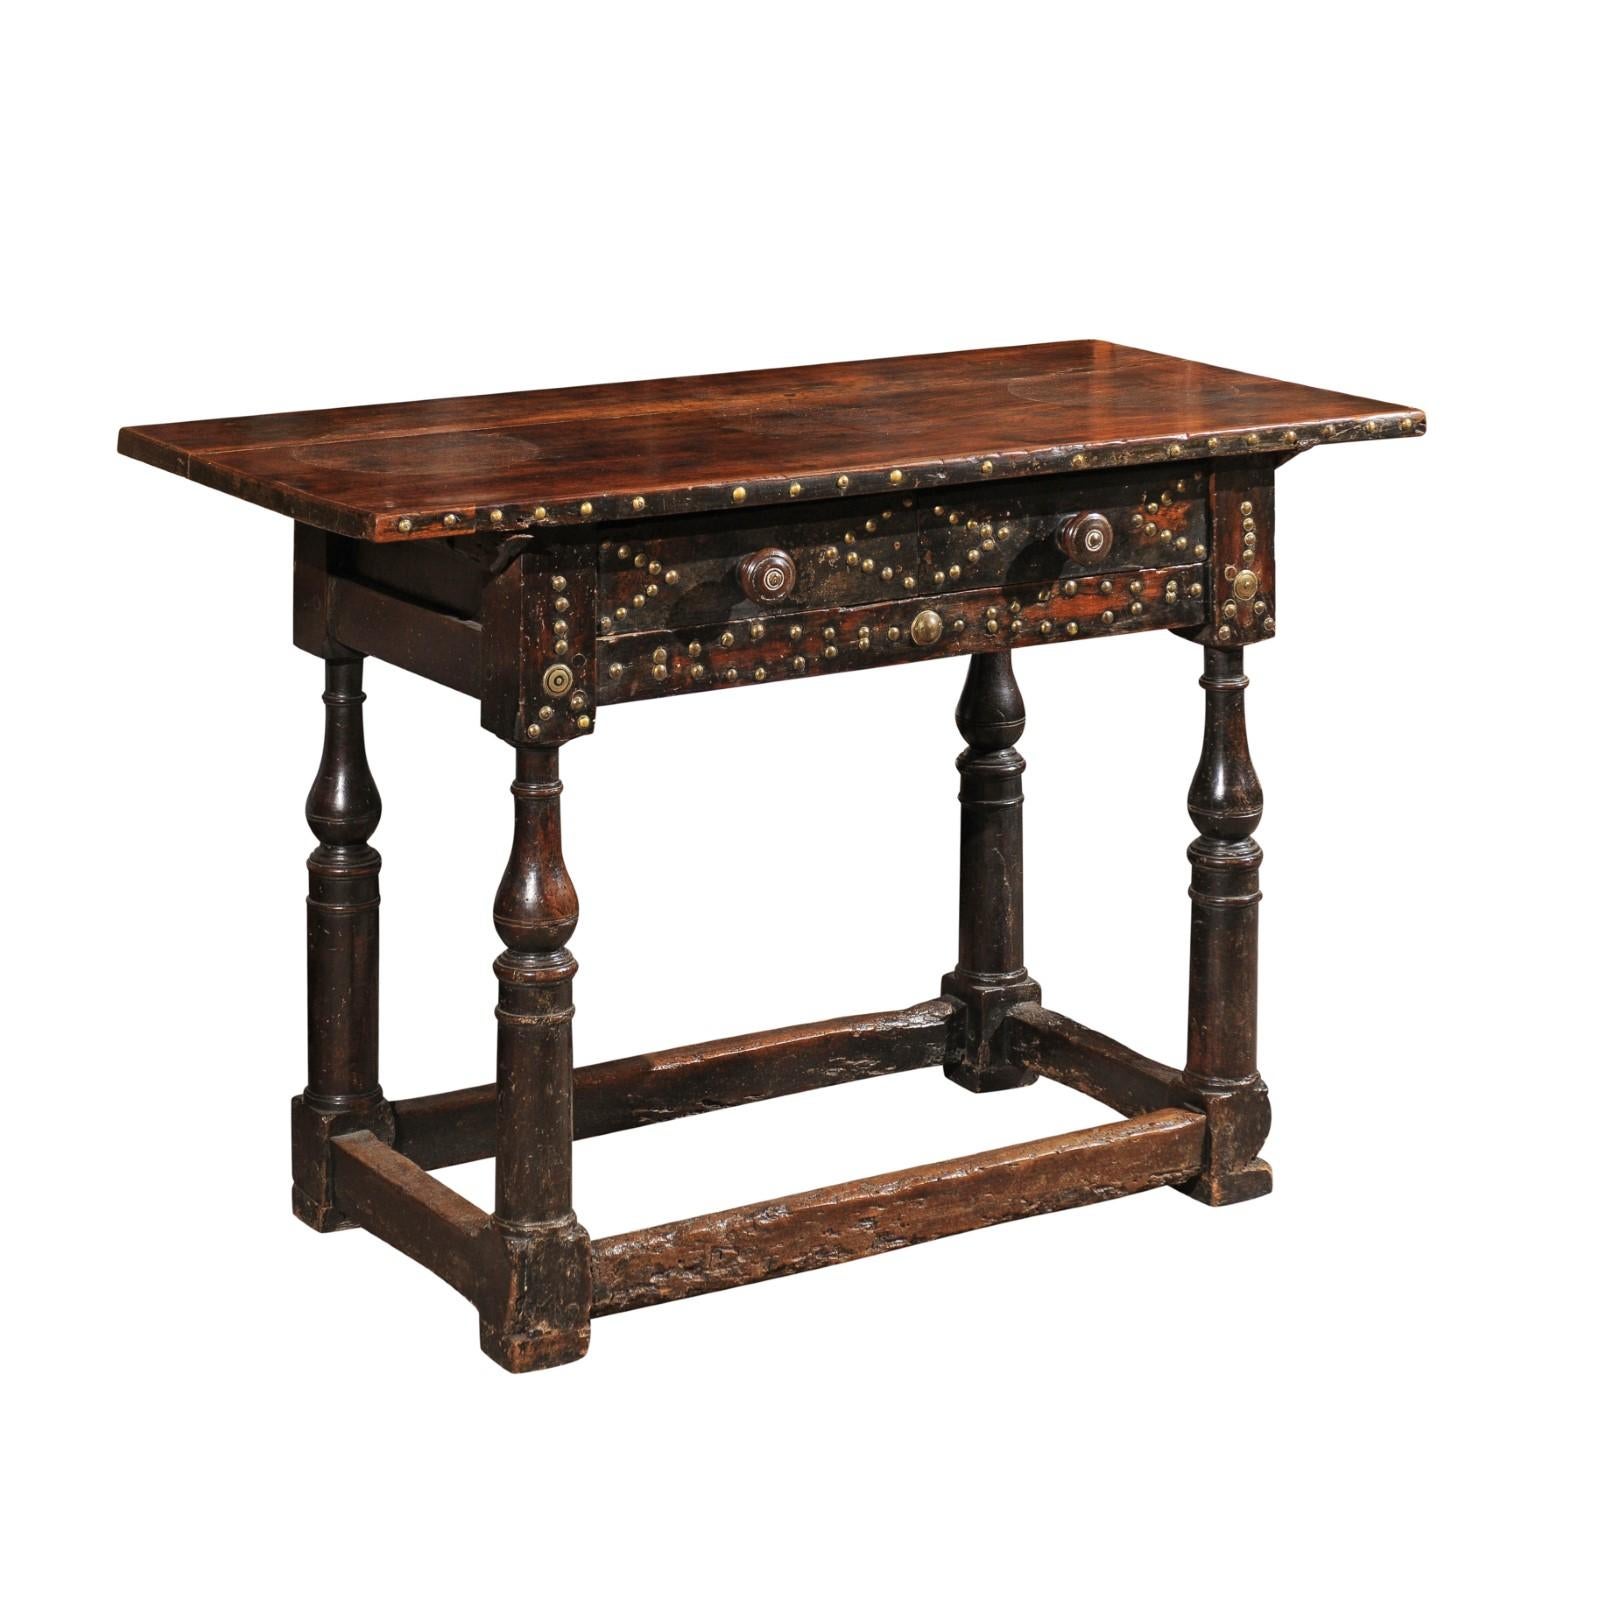 Late 18th Century Spanish Walnut Console Table with Brass Studs